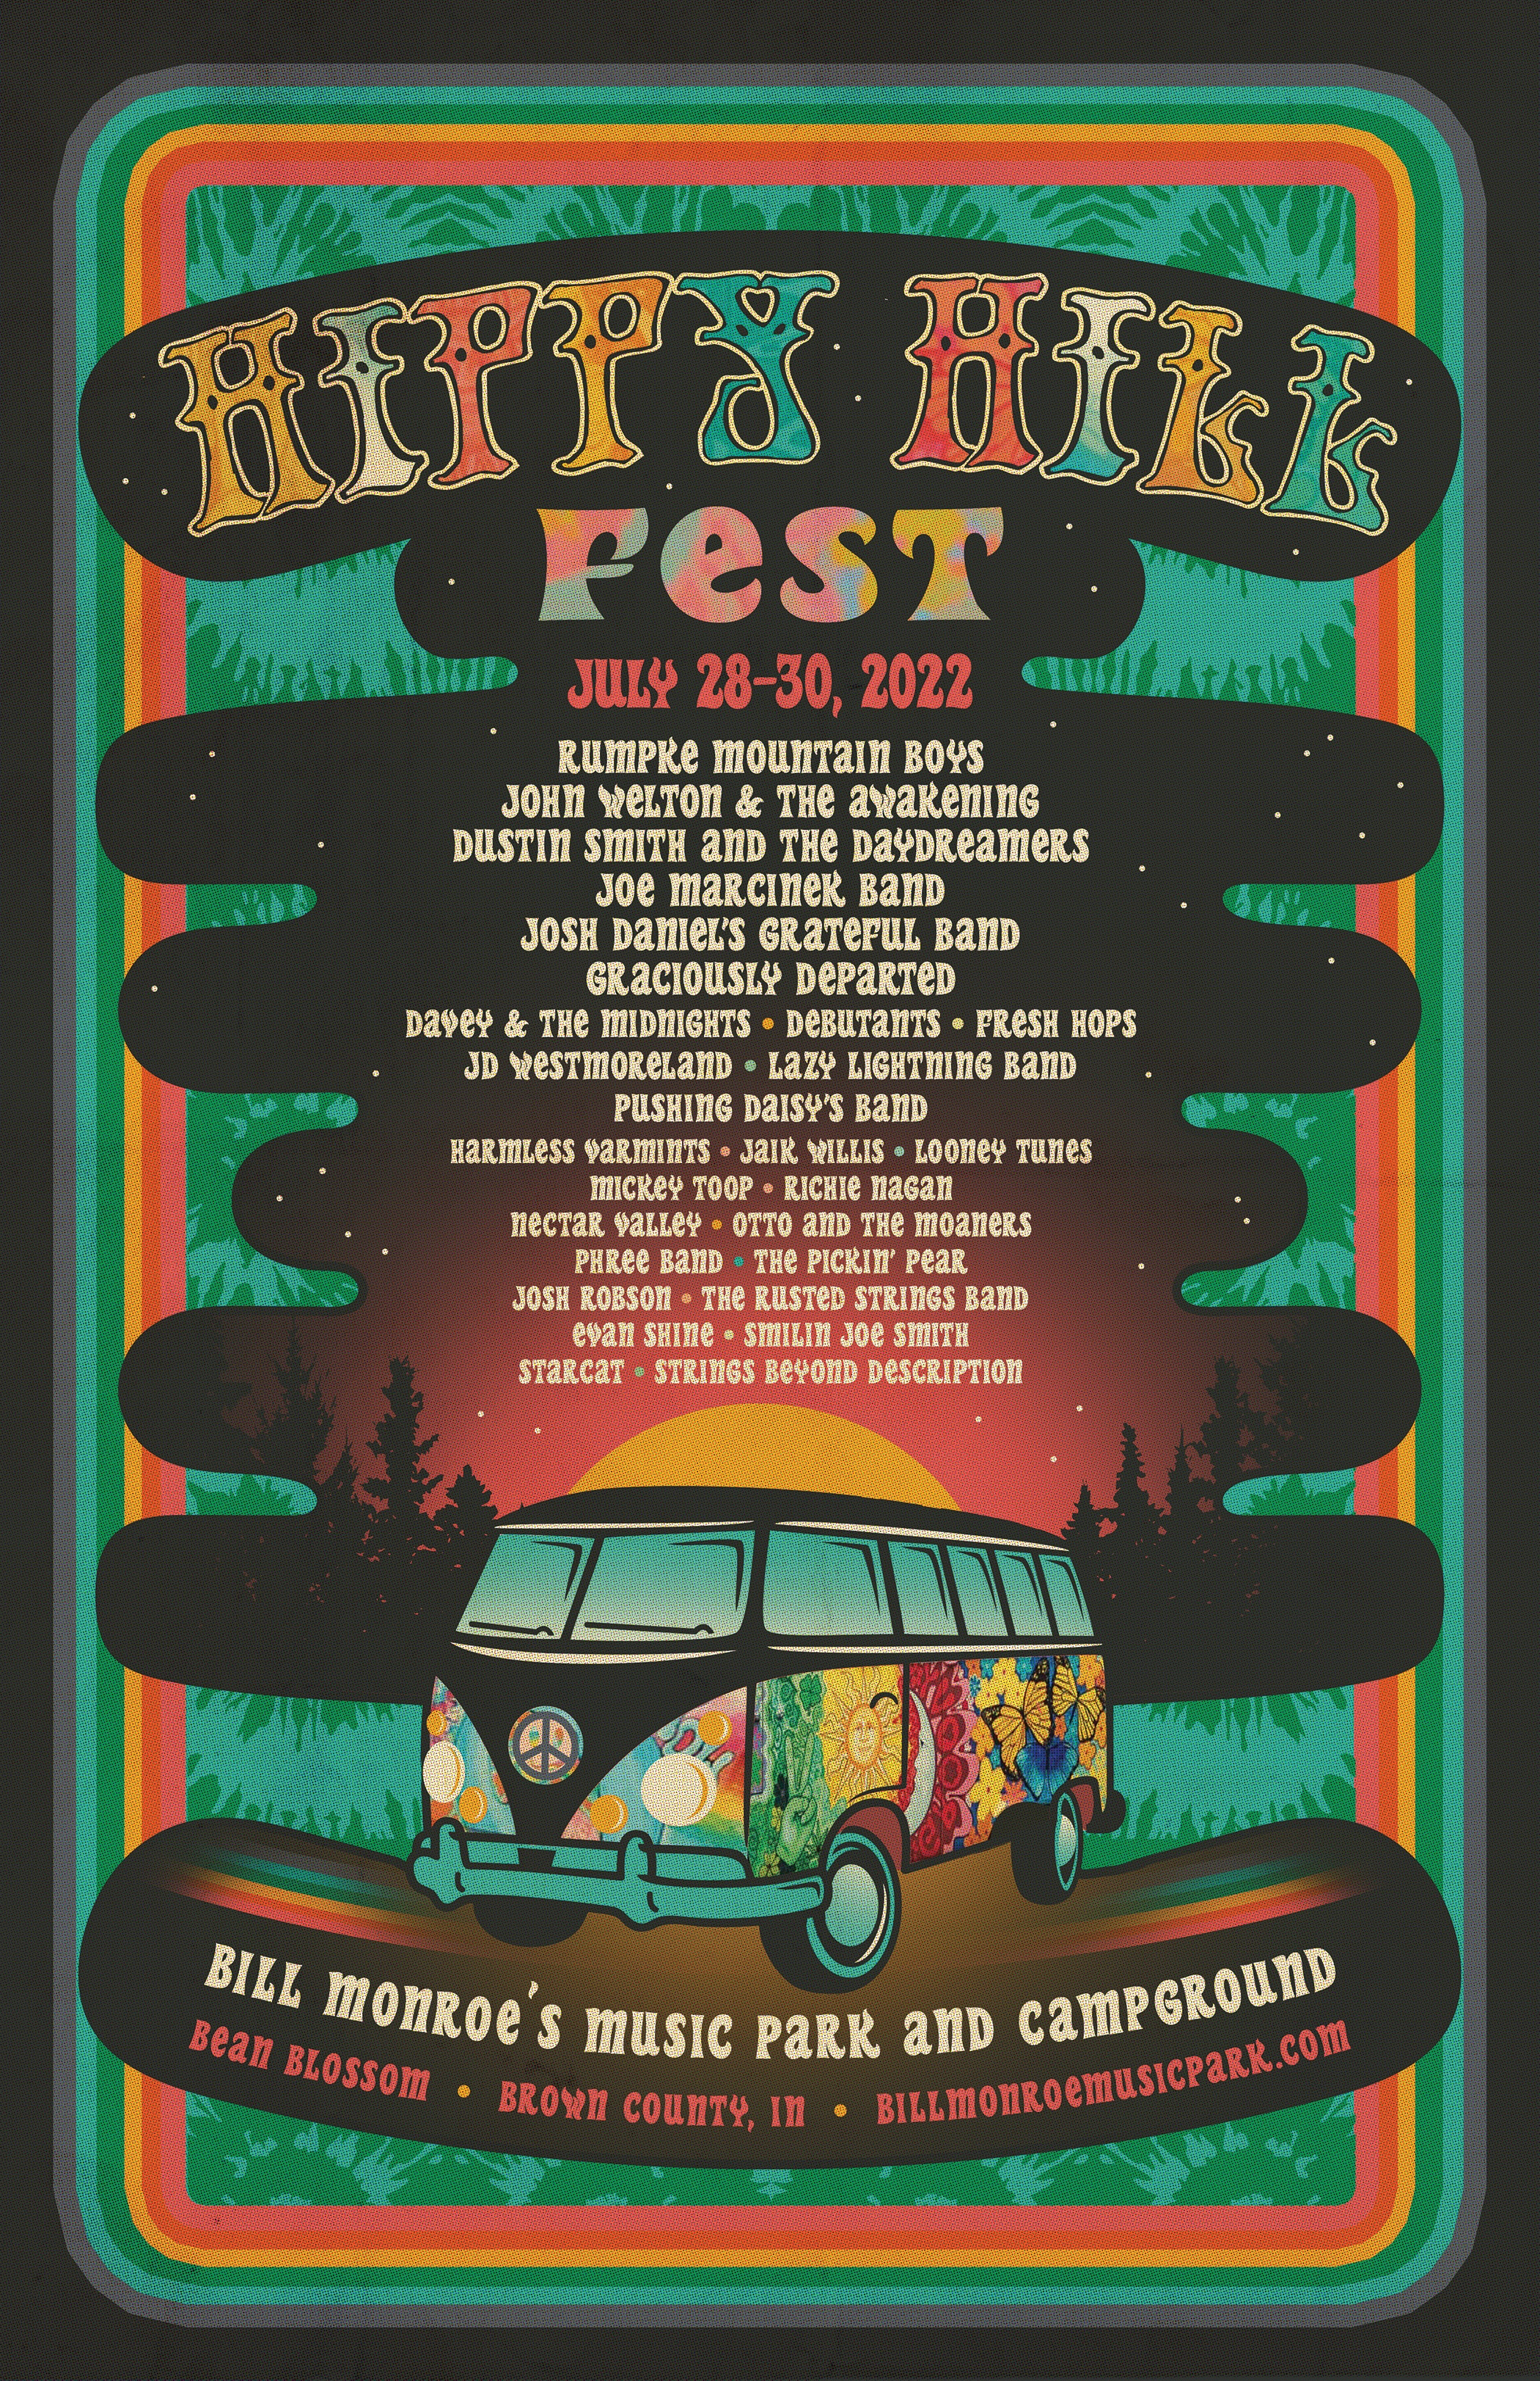 2nd Annual Hippy Hill Fest - July 28-30, 2022